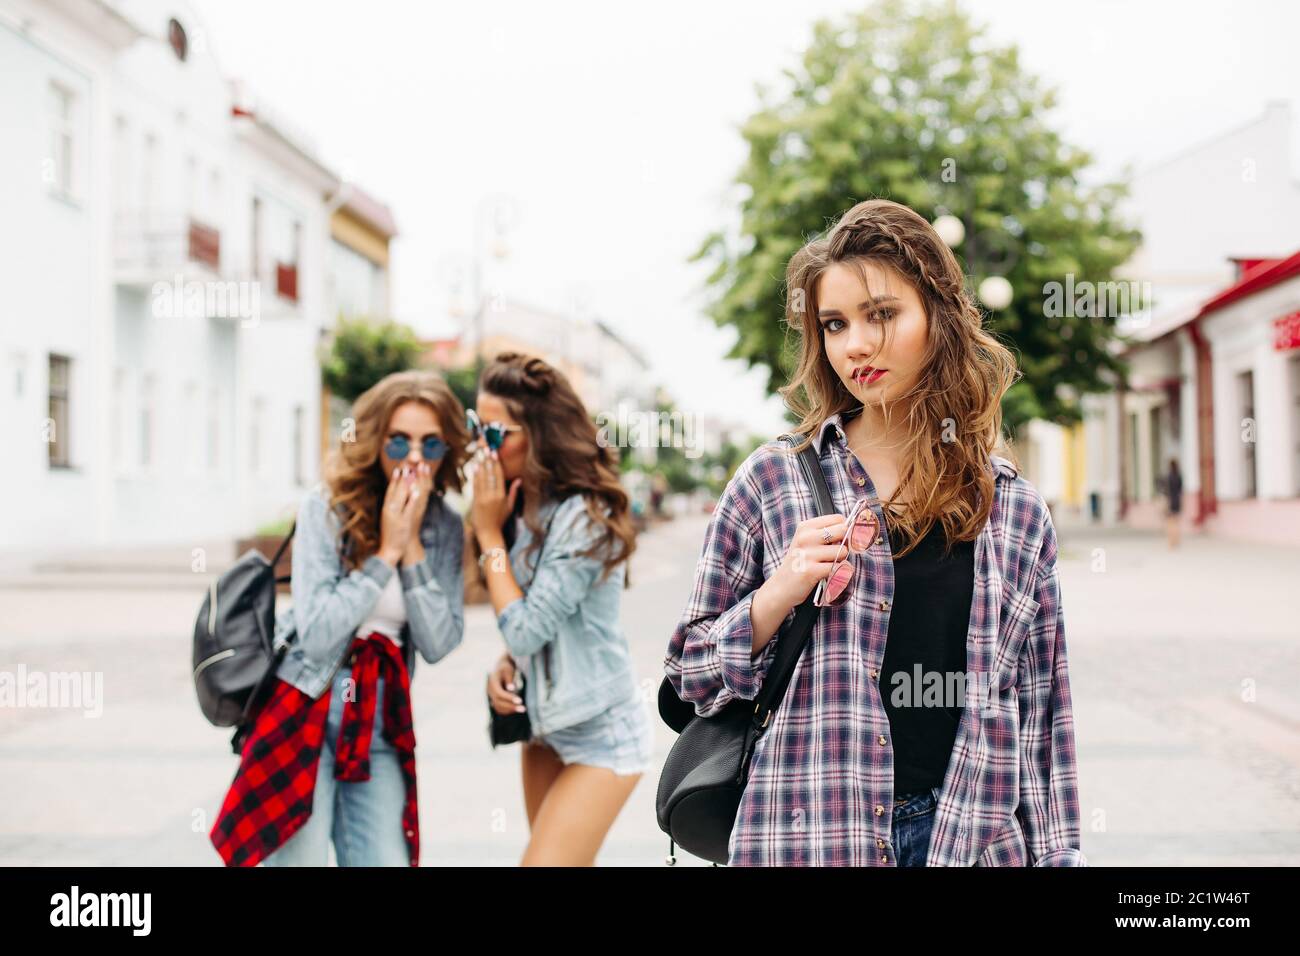 Jealous girls whispering about third girl in front of camera. Stock Photo